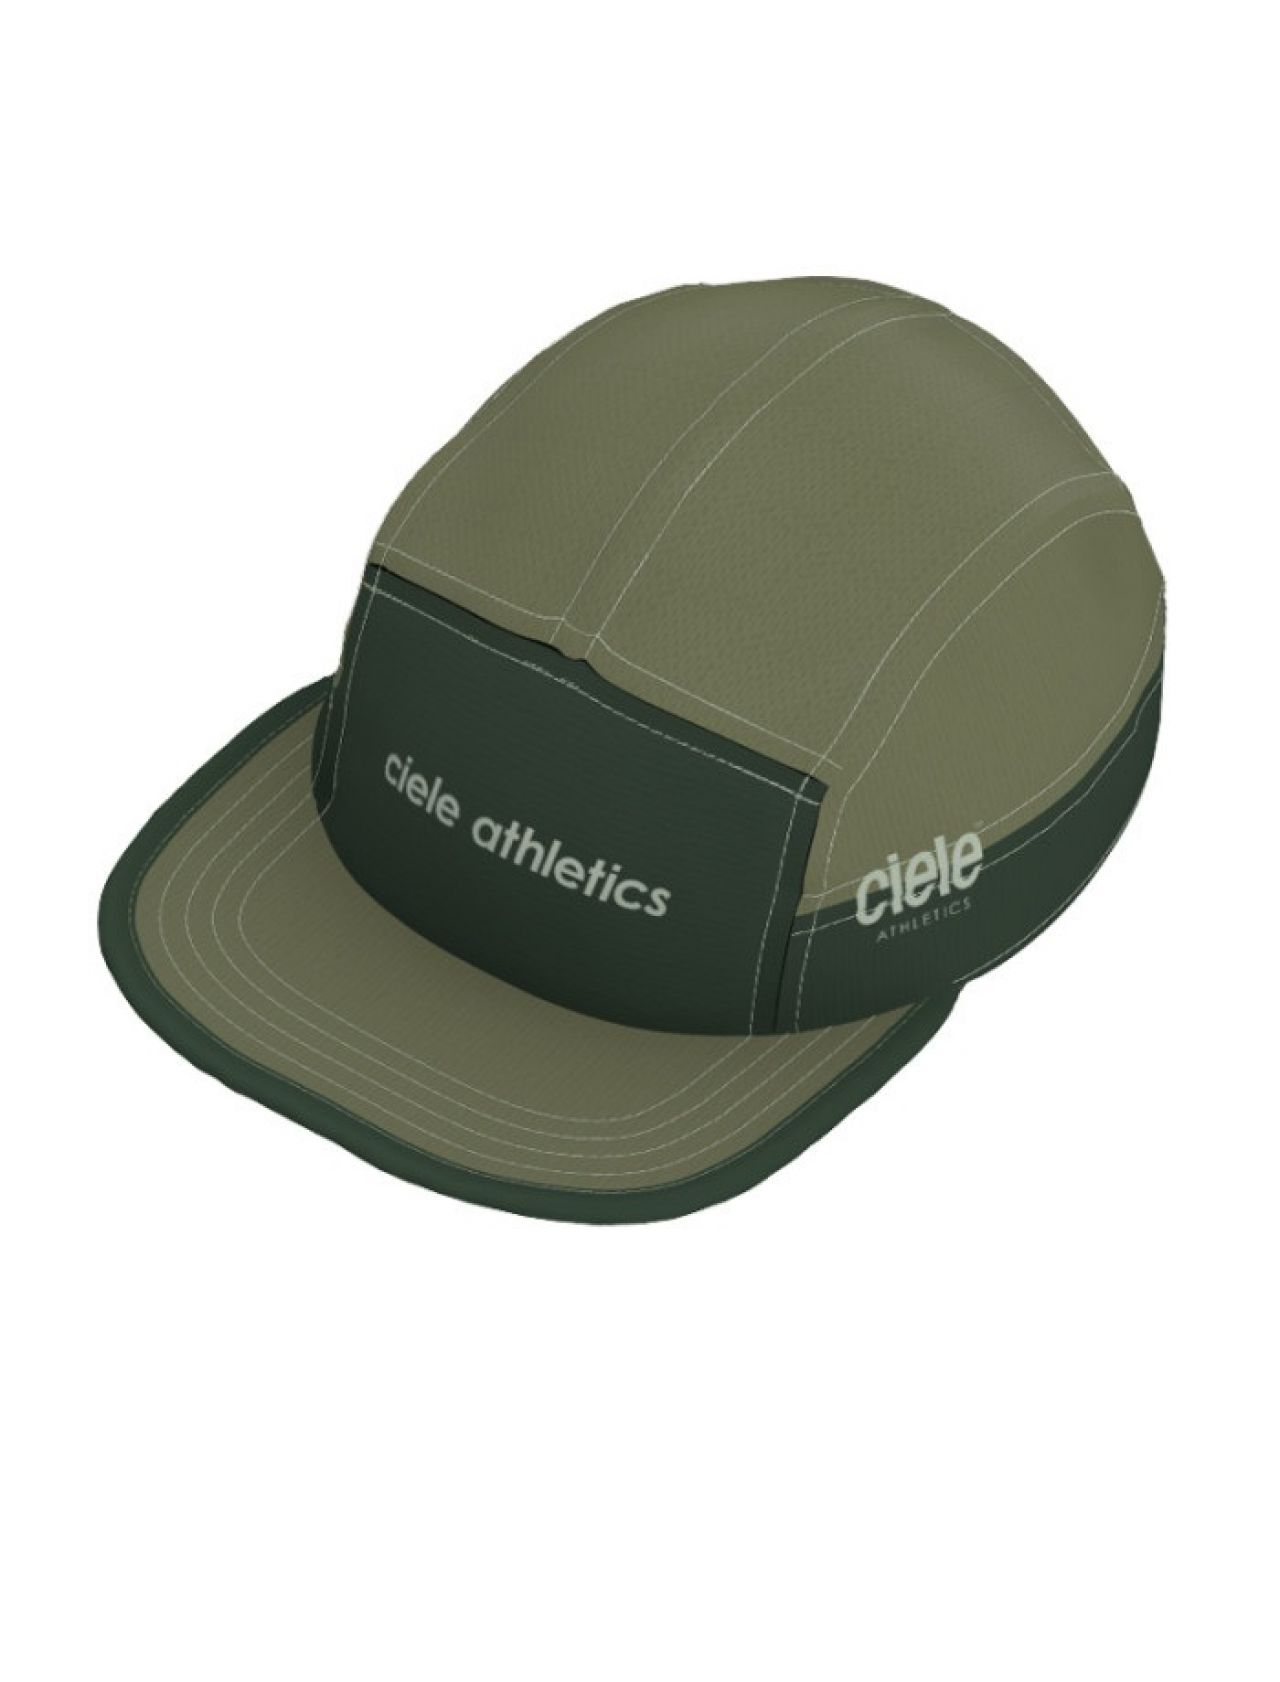 CIELE GOCAP C PLUS ICONIC SMALL FOR A Casquette running